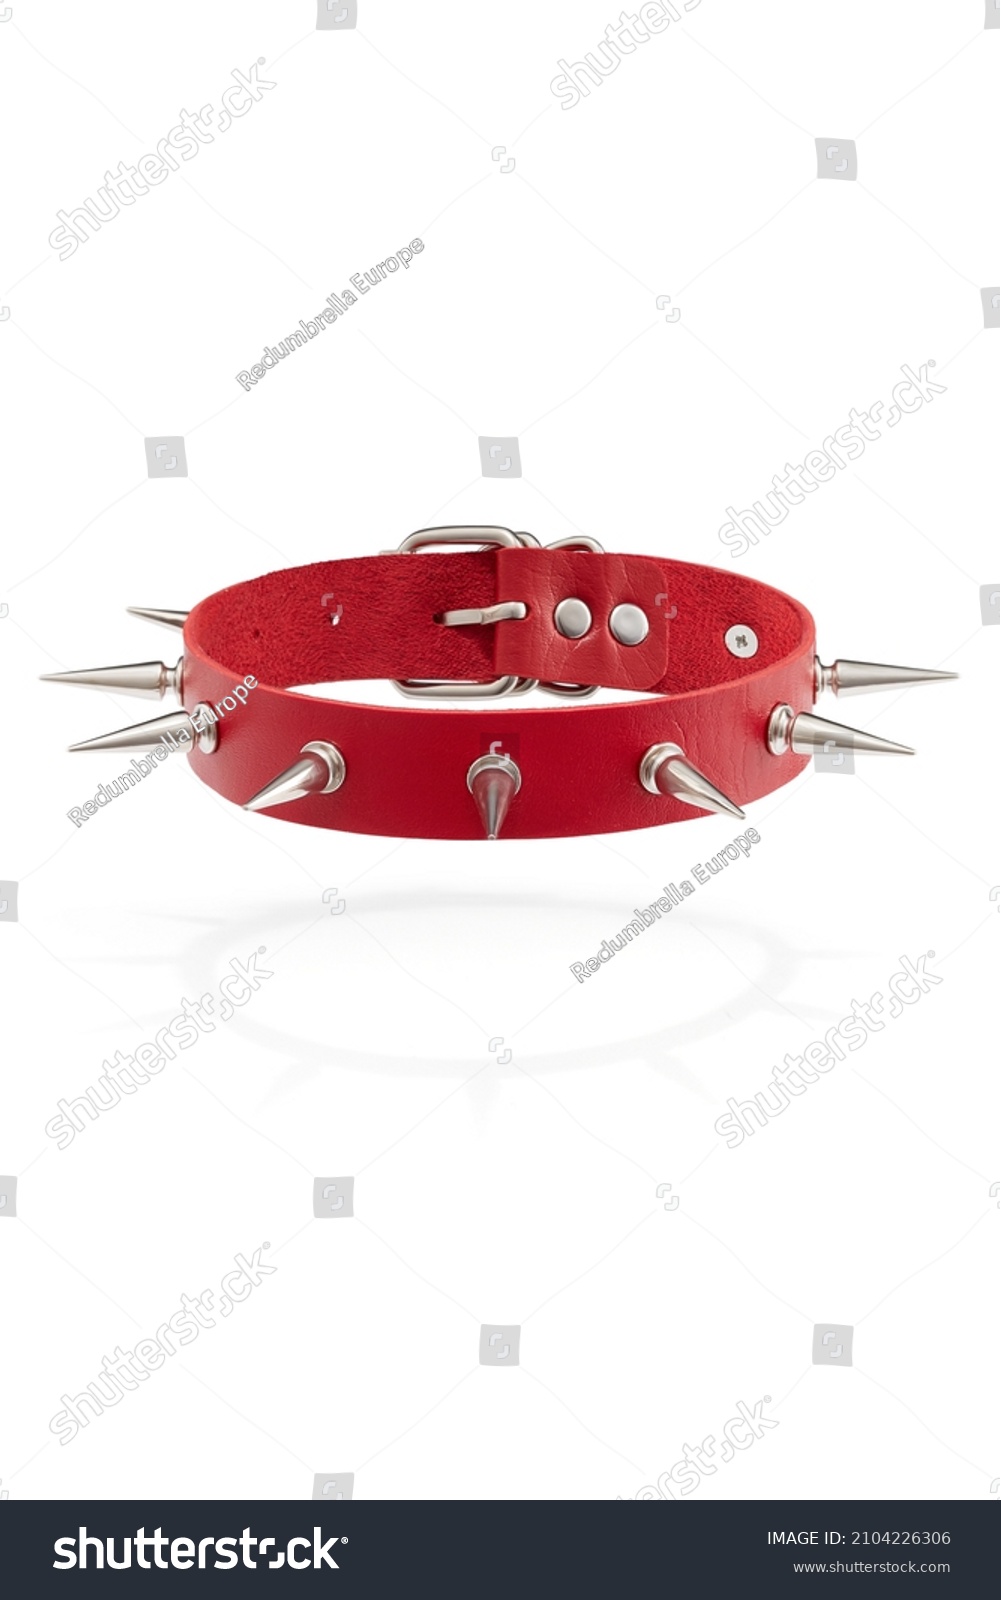 Detail shot of red leather collar with steel sharp thorns and metal buckle. Stylish adjustable choker is isolated on the white background.   #2104226306